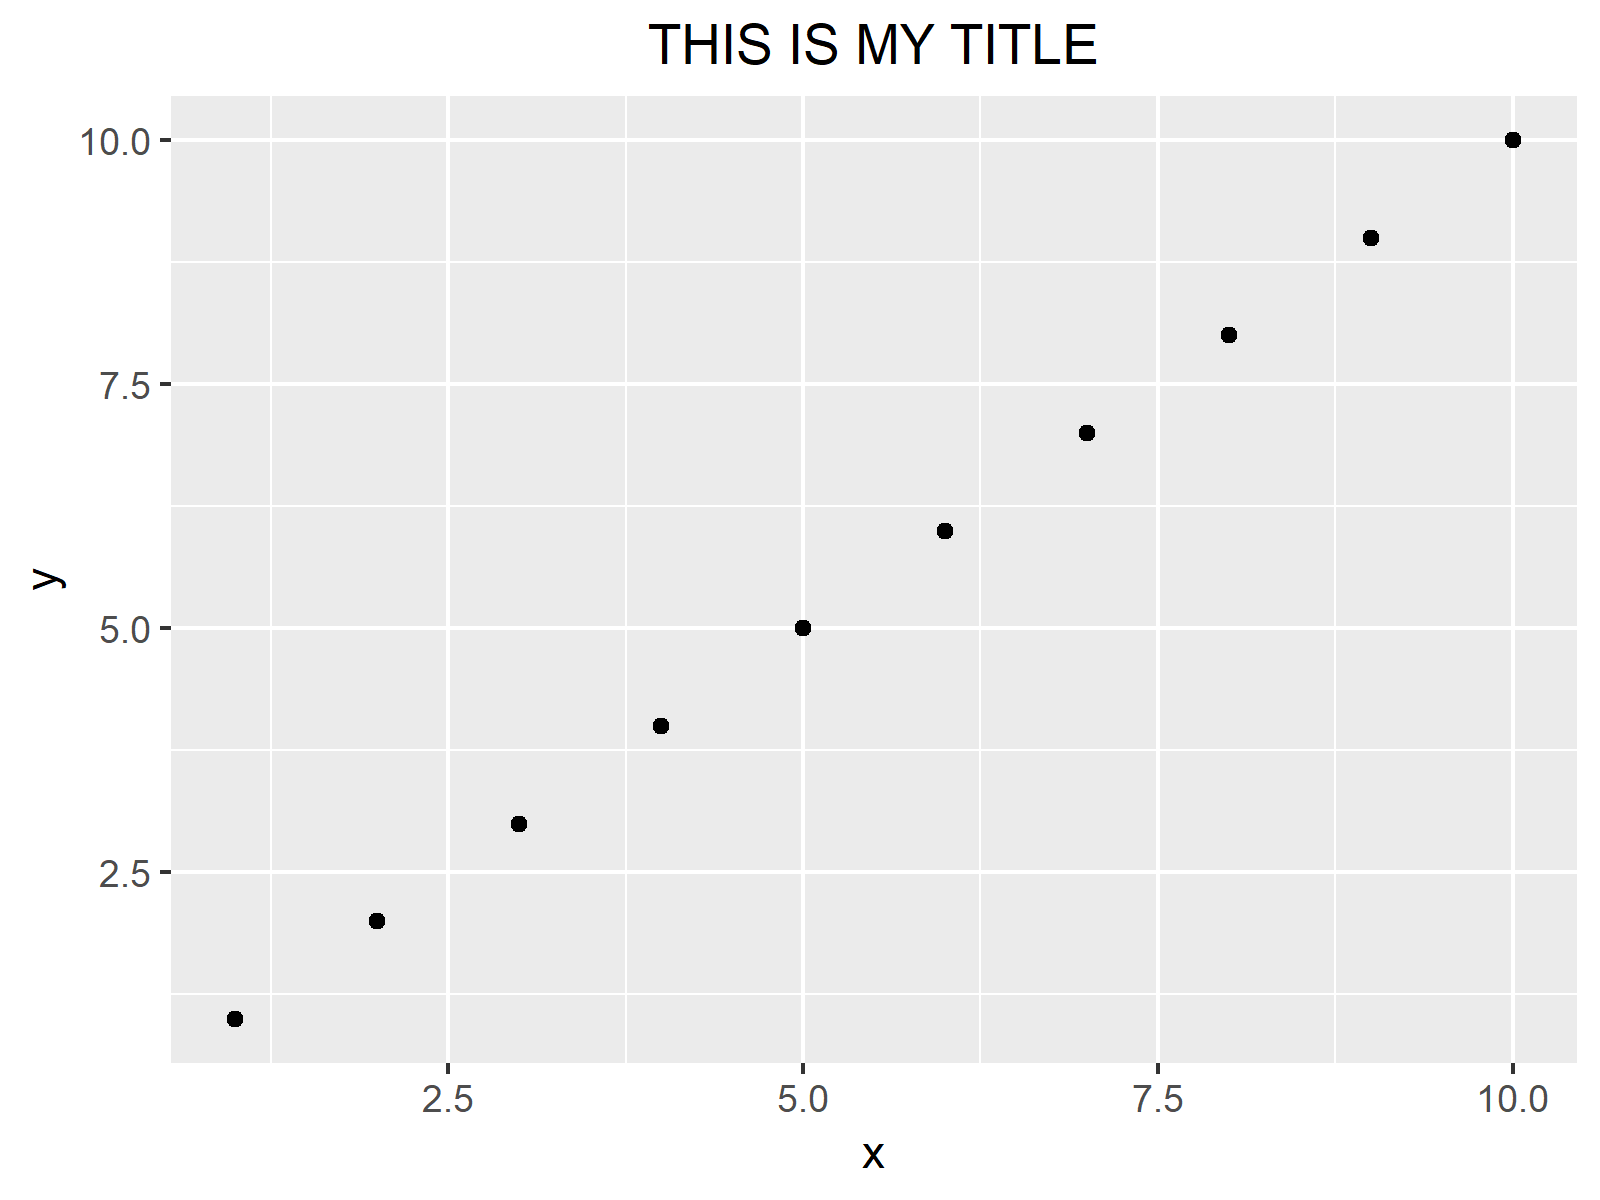 ggplot plot title in the middle